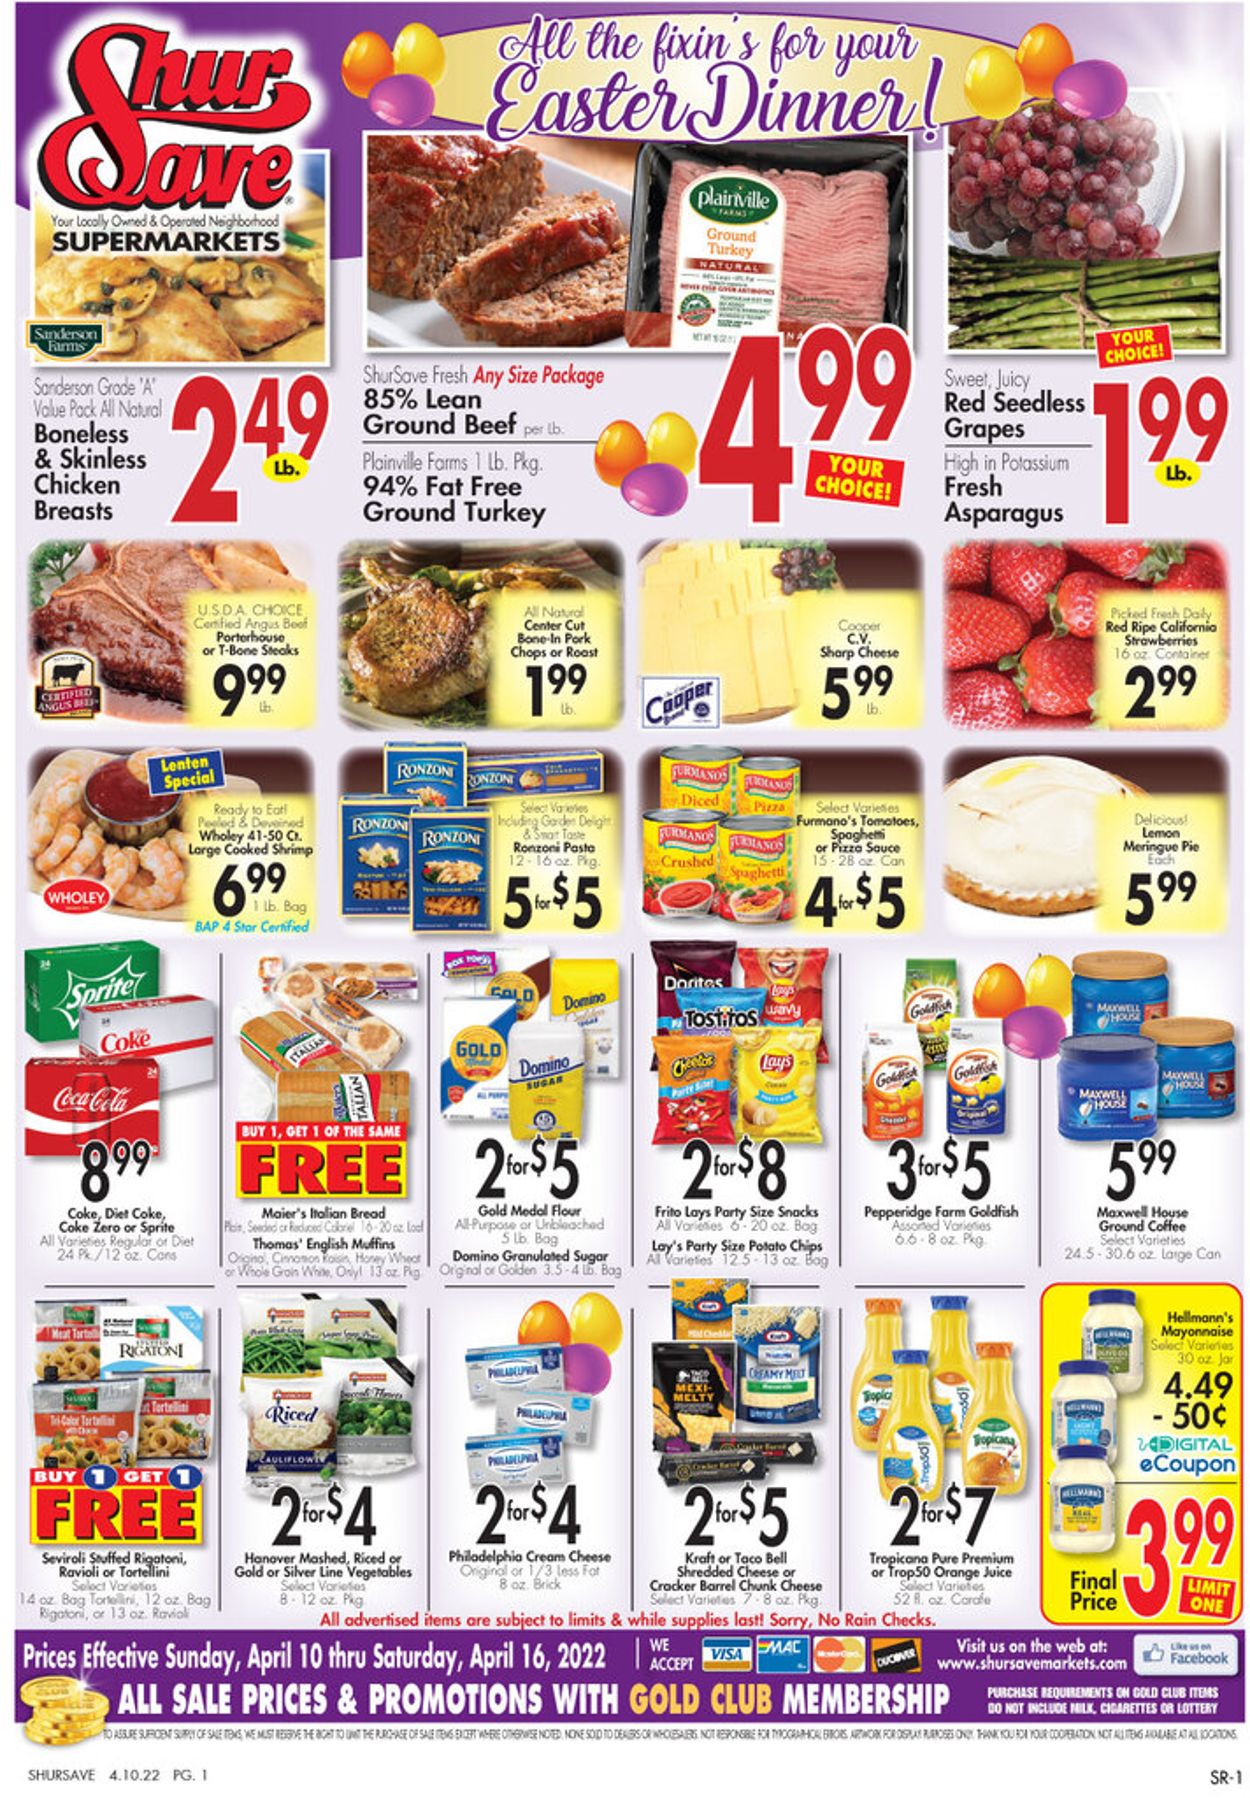 Gerrity's Supermarkets EASTER 2022 Weekly Ad Circular - valid 04/10-04/16/2022 (Page 2)